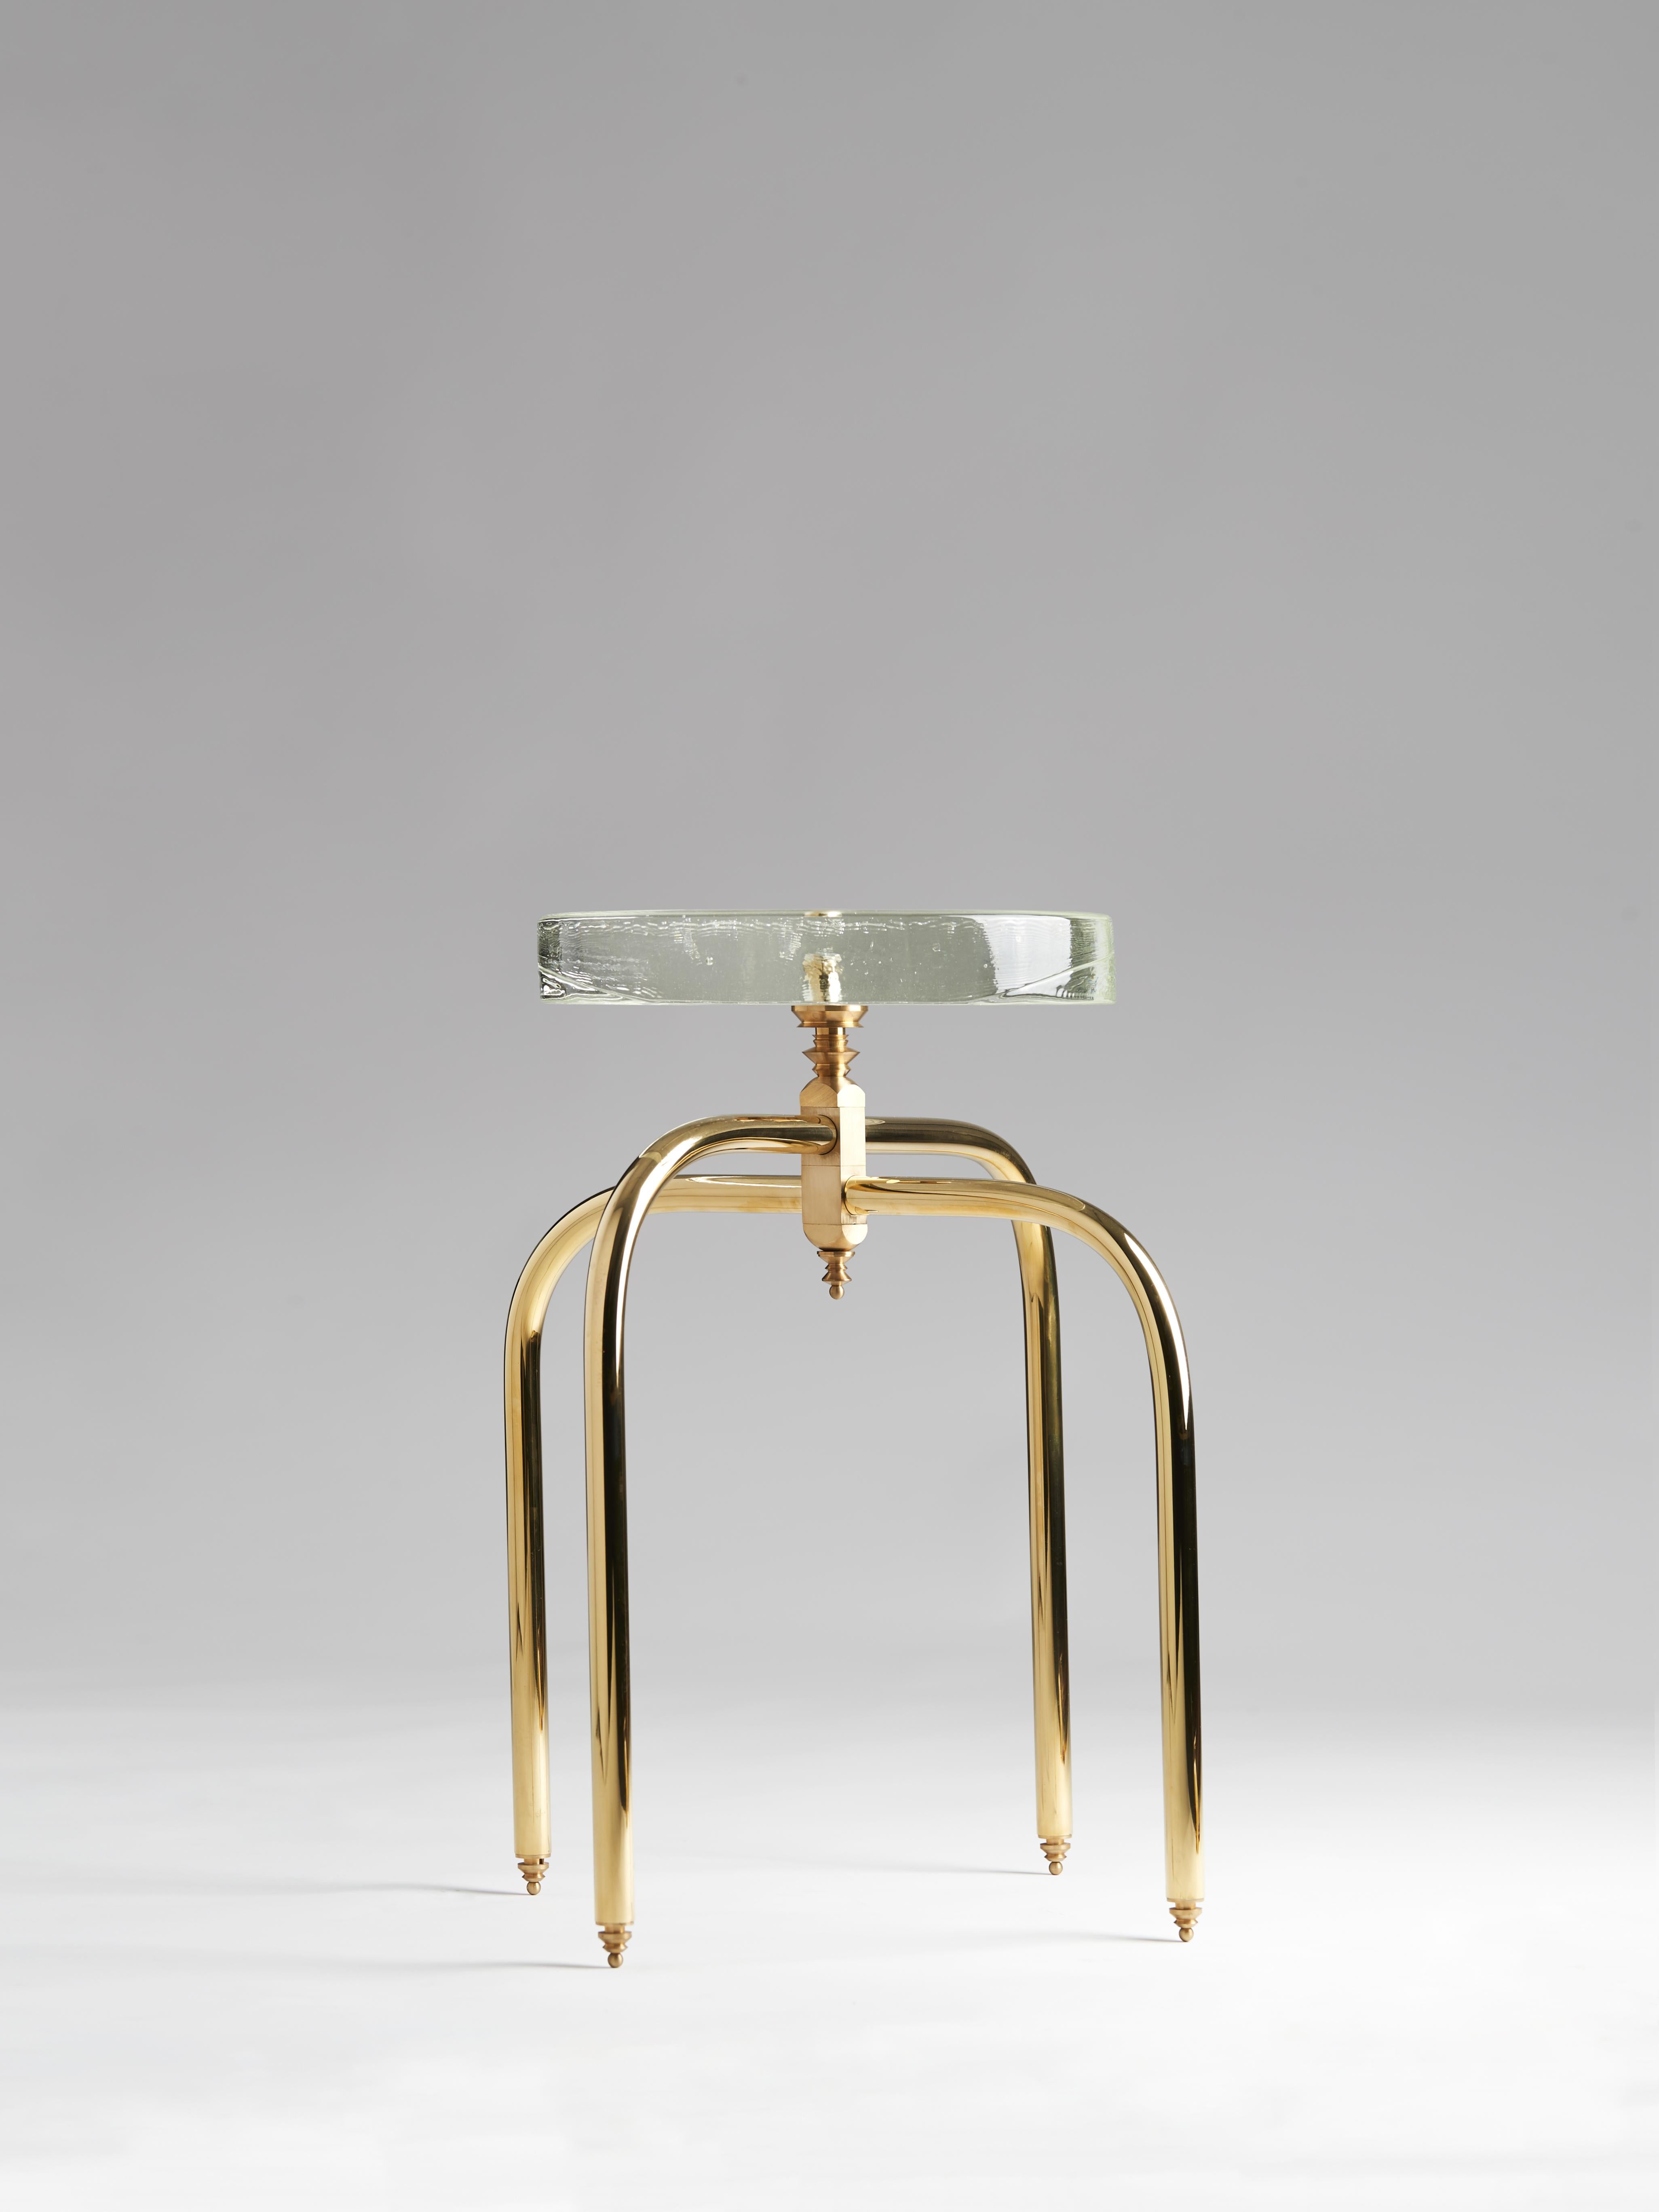 Dorique stool by Mydriaz
Dimensions: w 40 x d 40 x h 55 cm
Materials: Brass, glass

Made to order creations are possible.

Our products are handmade in our workshop. Dimensions and finishes may vary slightly from one model to another dimension